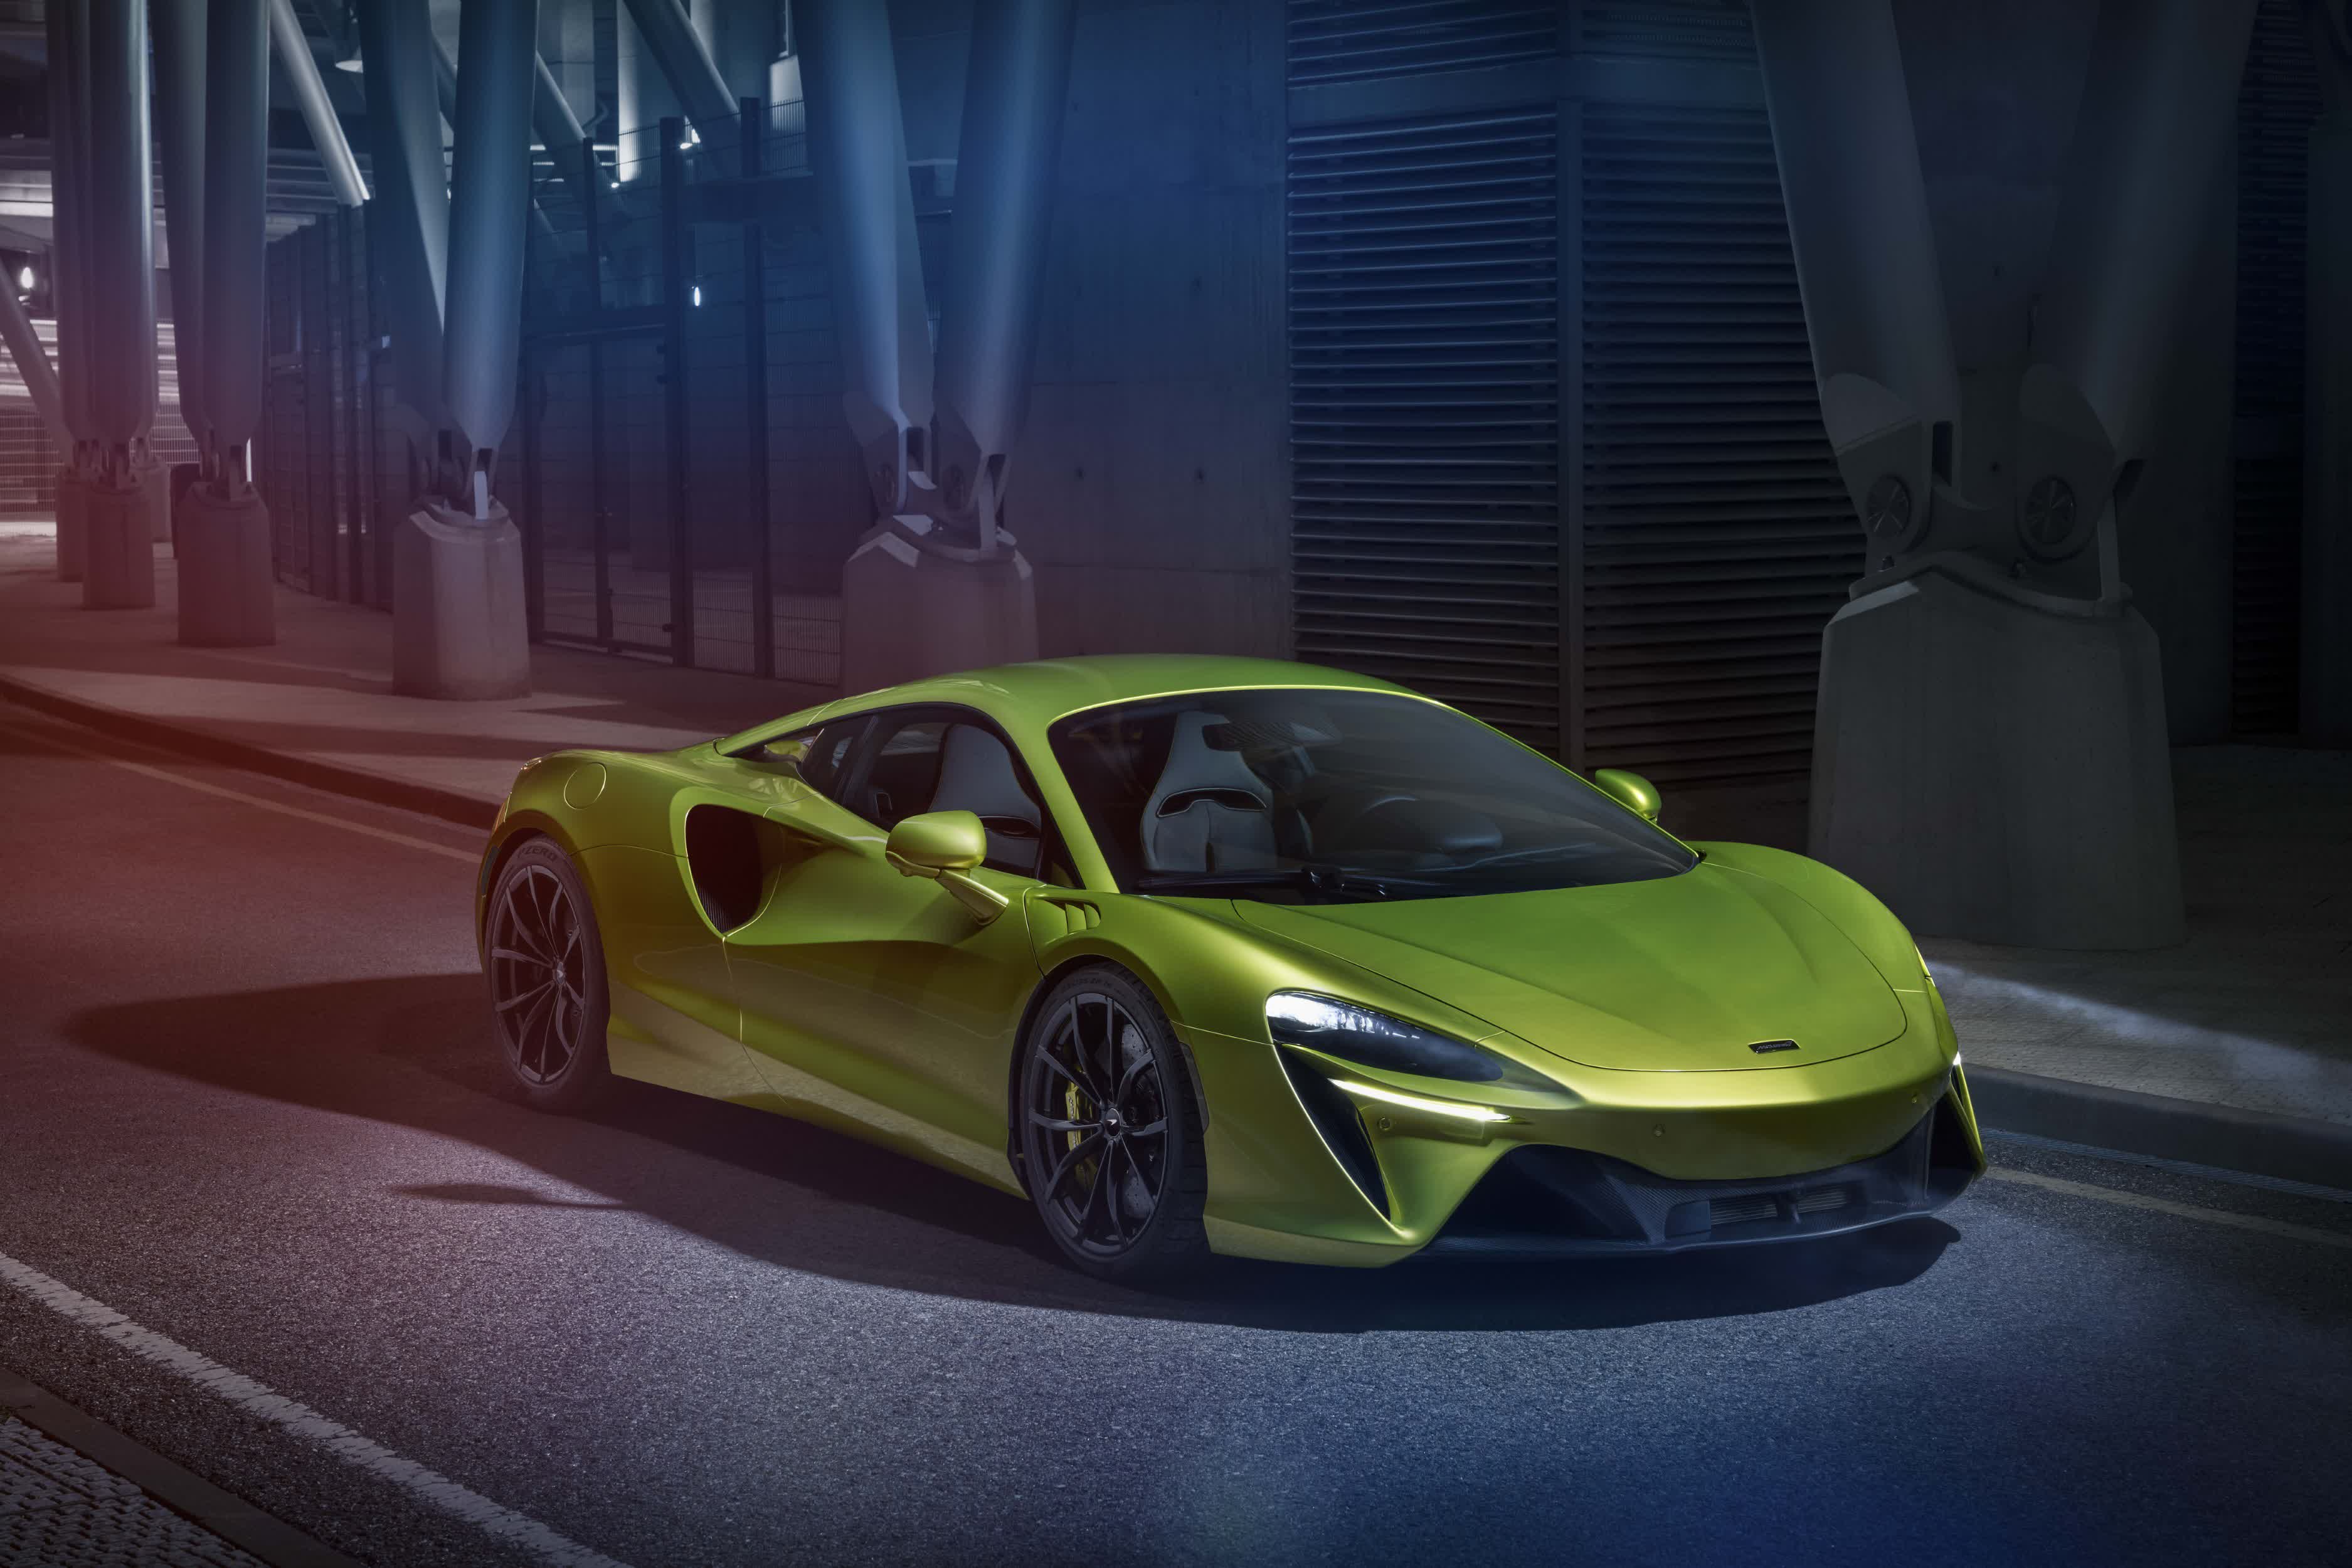 McLaren Artura brings hybrid tech without the weight penalty